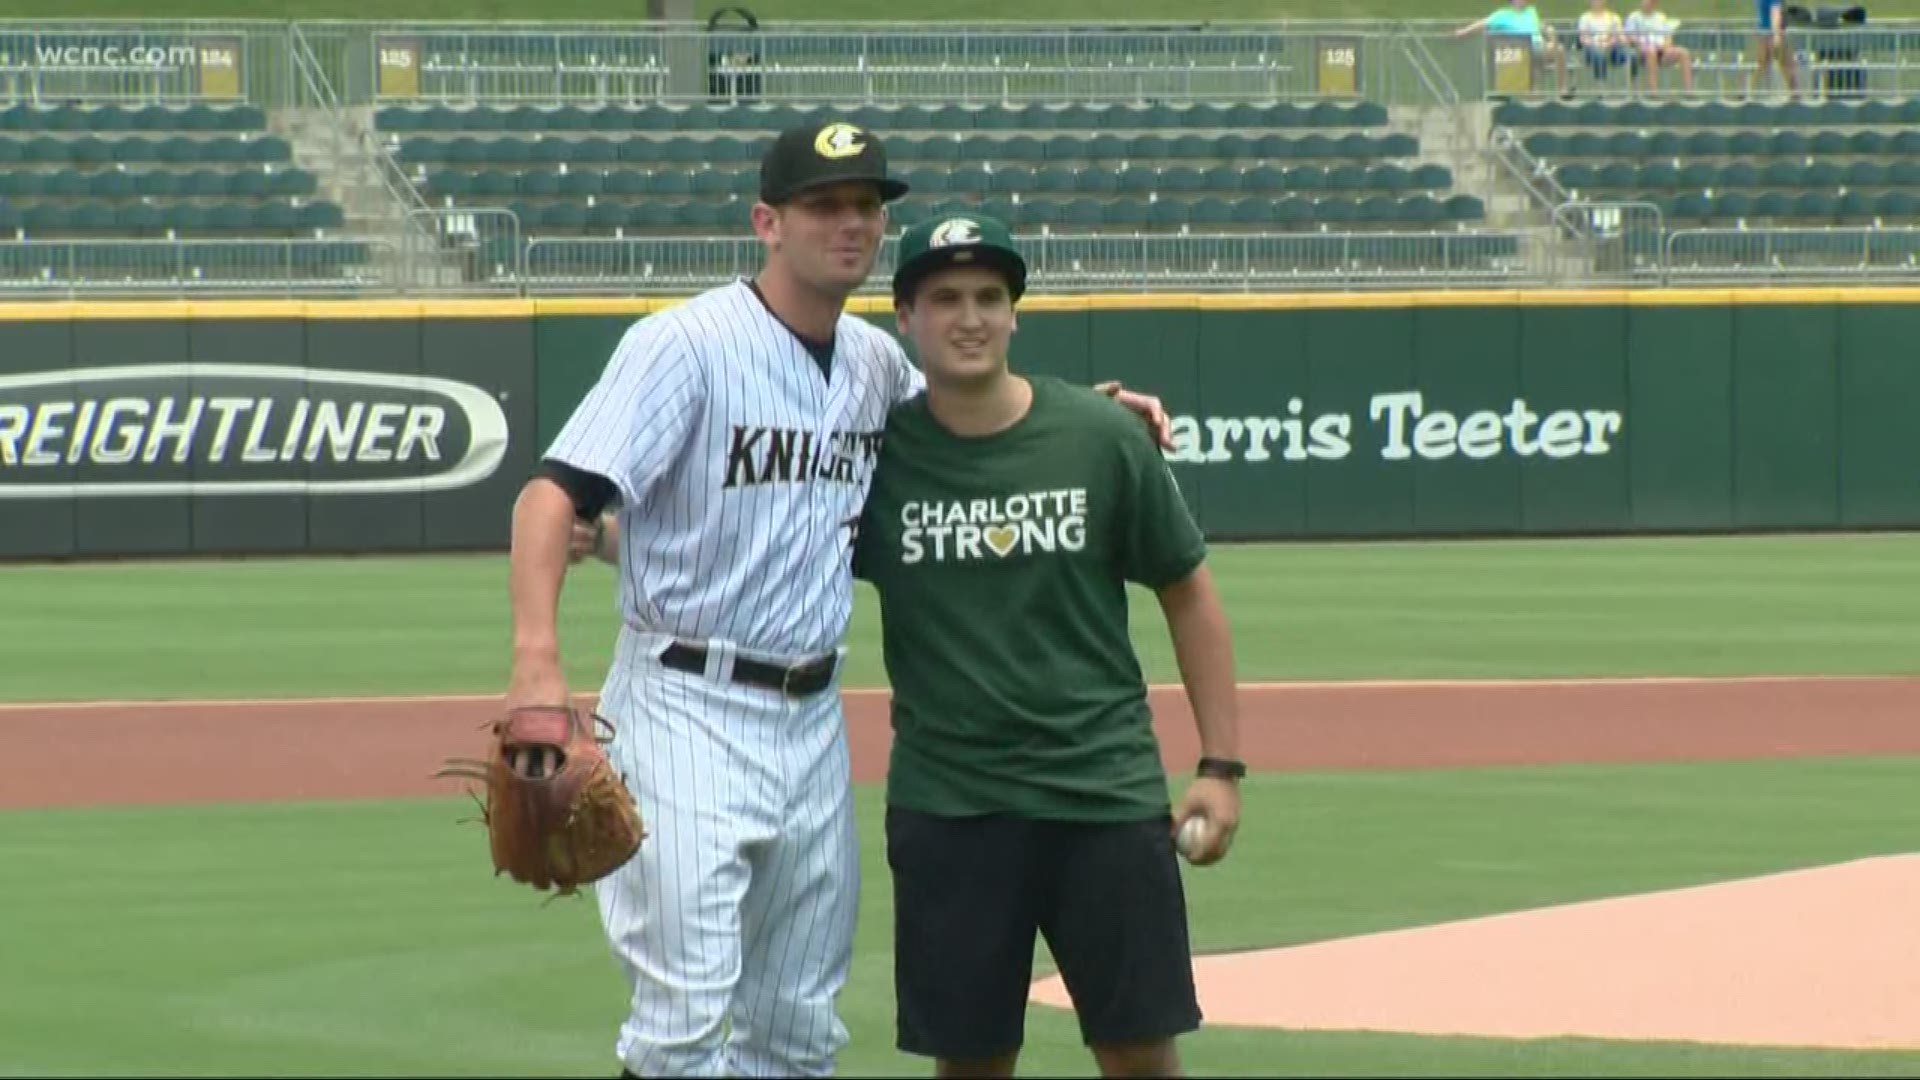 UNC Charlotte shooting survivor Drew Pescaro took the pitching mound Sunday for the Charlotte Knights. He was invited to throw the ceremonial first pitch.